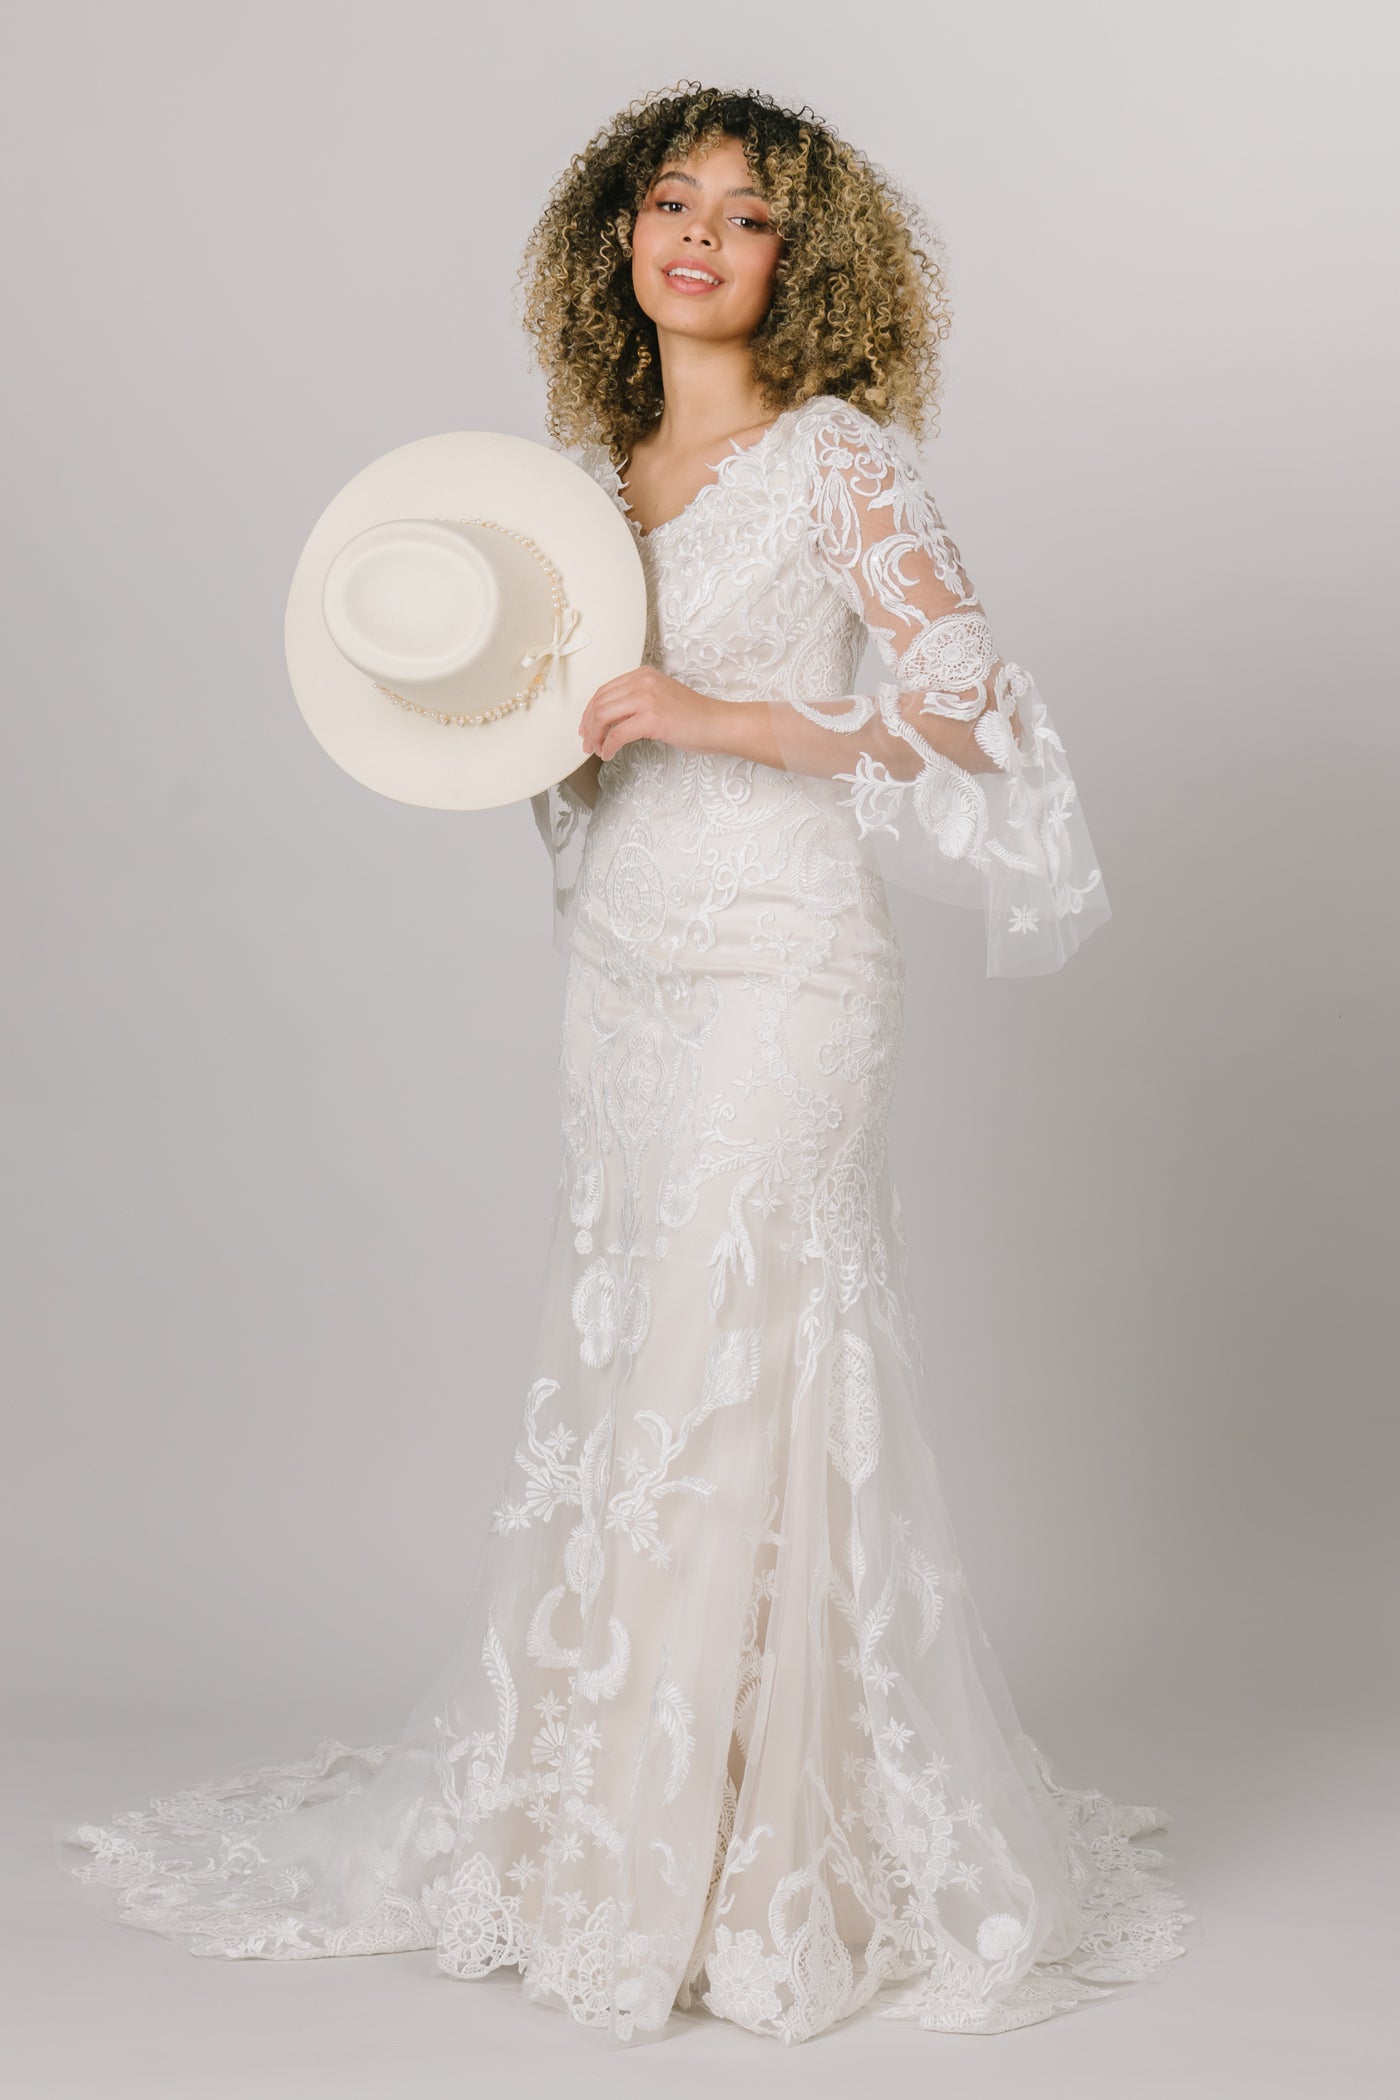 This modest wedding dress has a lace pattern and complemented with beautiful bell sleeves with a cream hat and in an ivory color.